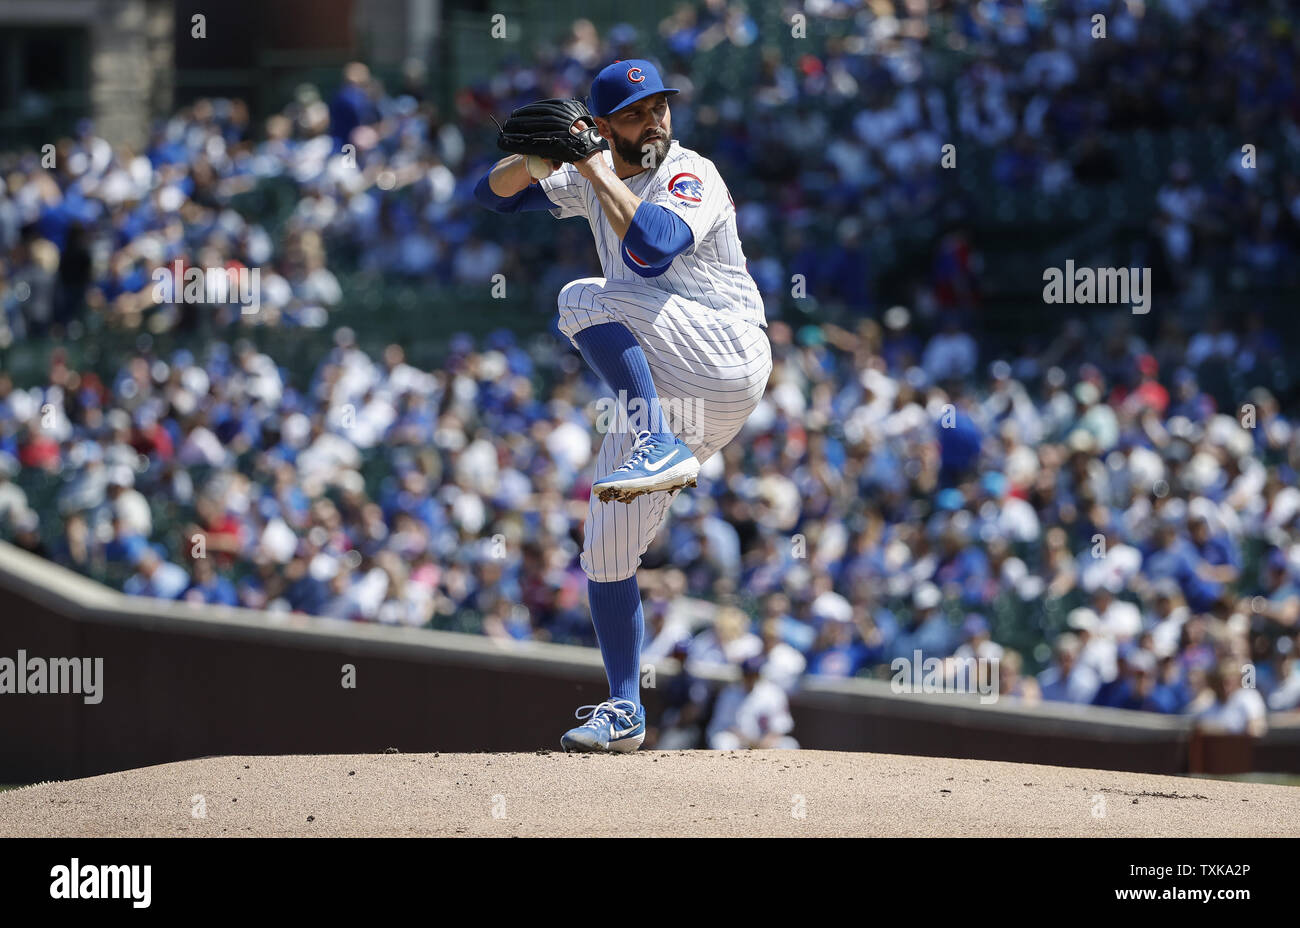 Chicago Cubs starting pitcher Tyler Chatwood delivers against the Arizona Diamondbacks in the first inning in at Wrigley Field on April 21, 2019 in Chicago. Photo by Kamil Krzaczynski/UPI Stock Photo